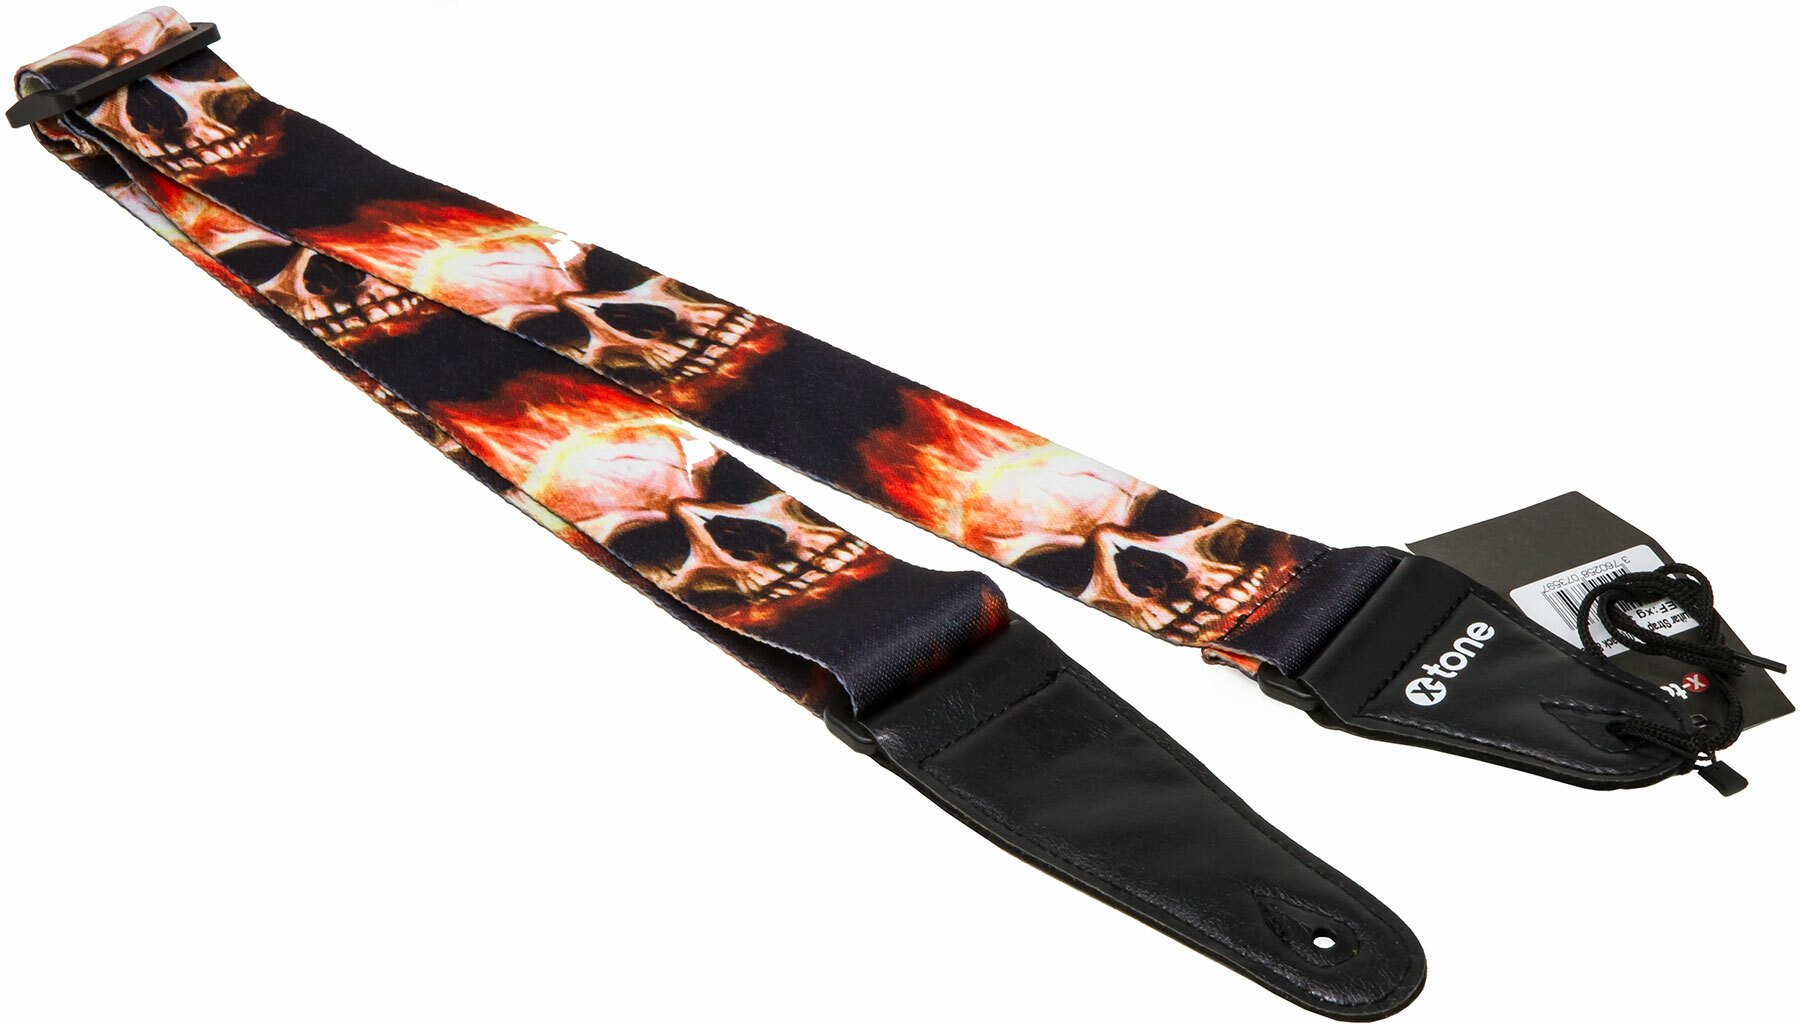 X-tone Xg 3101 Nylon Guitar Strap Skull With Flame Black & Red - Gitaarriem - Main picture